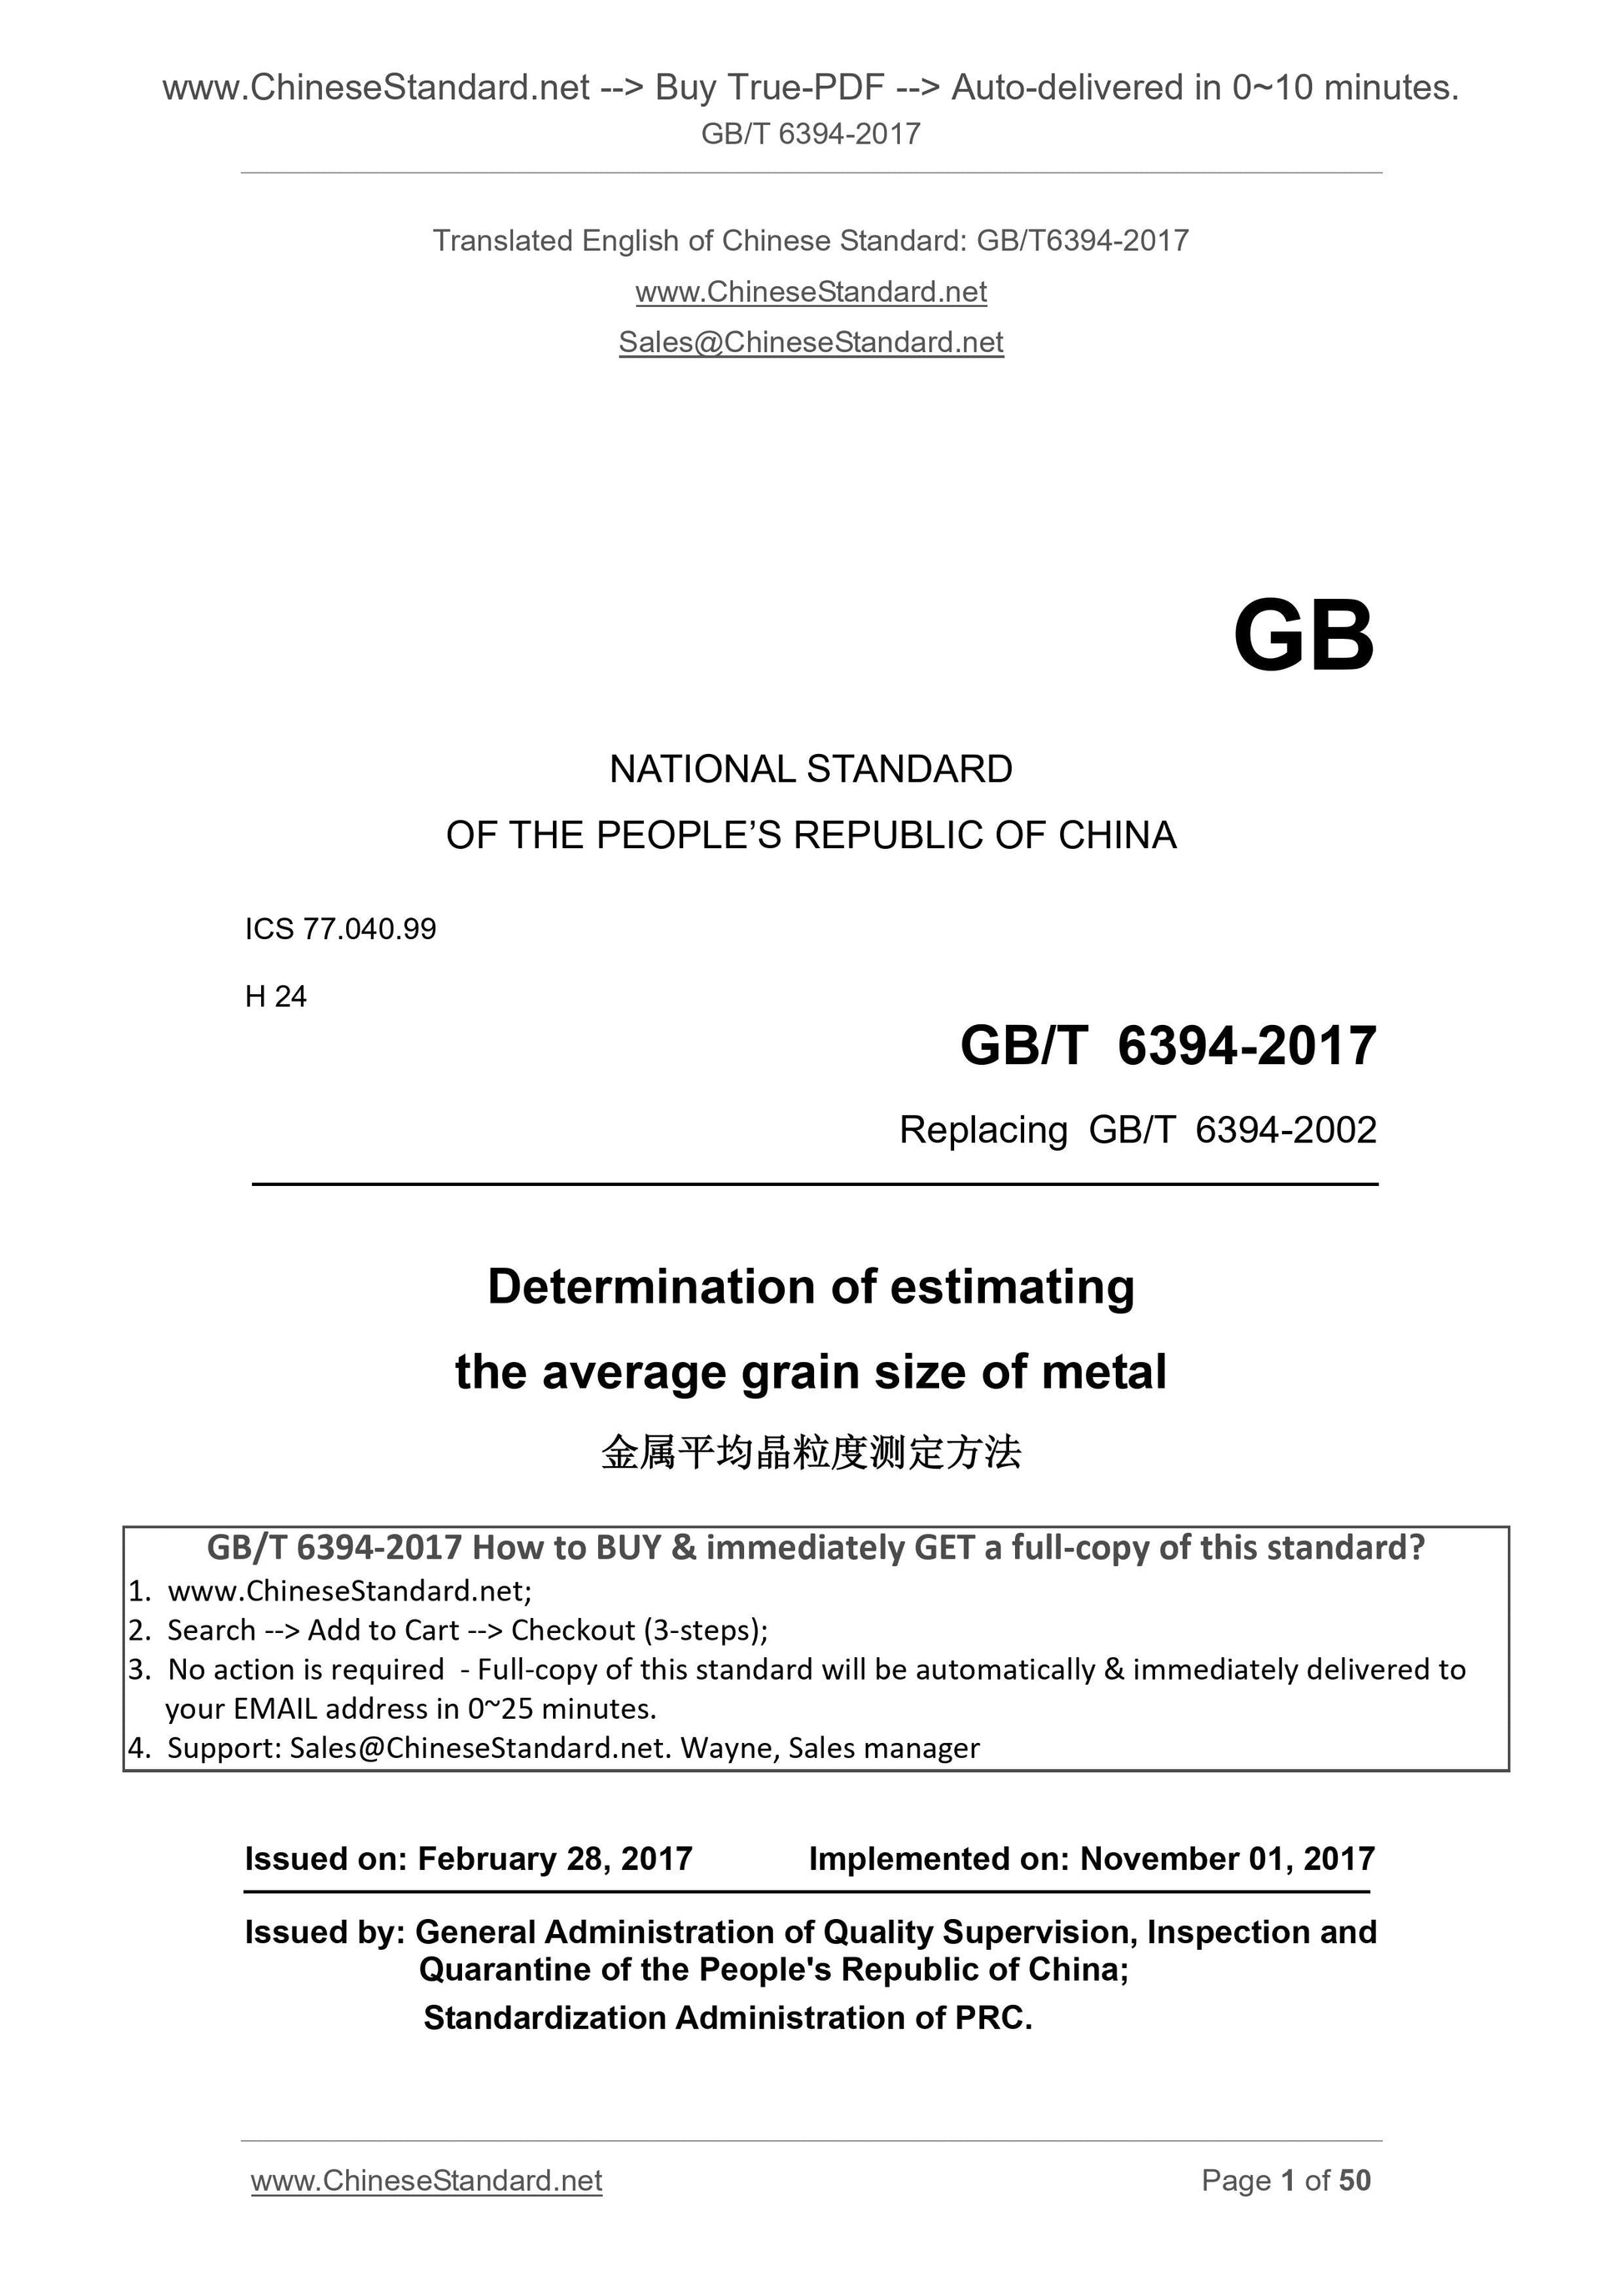 GB/T 6394-2017 Page 1